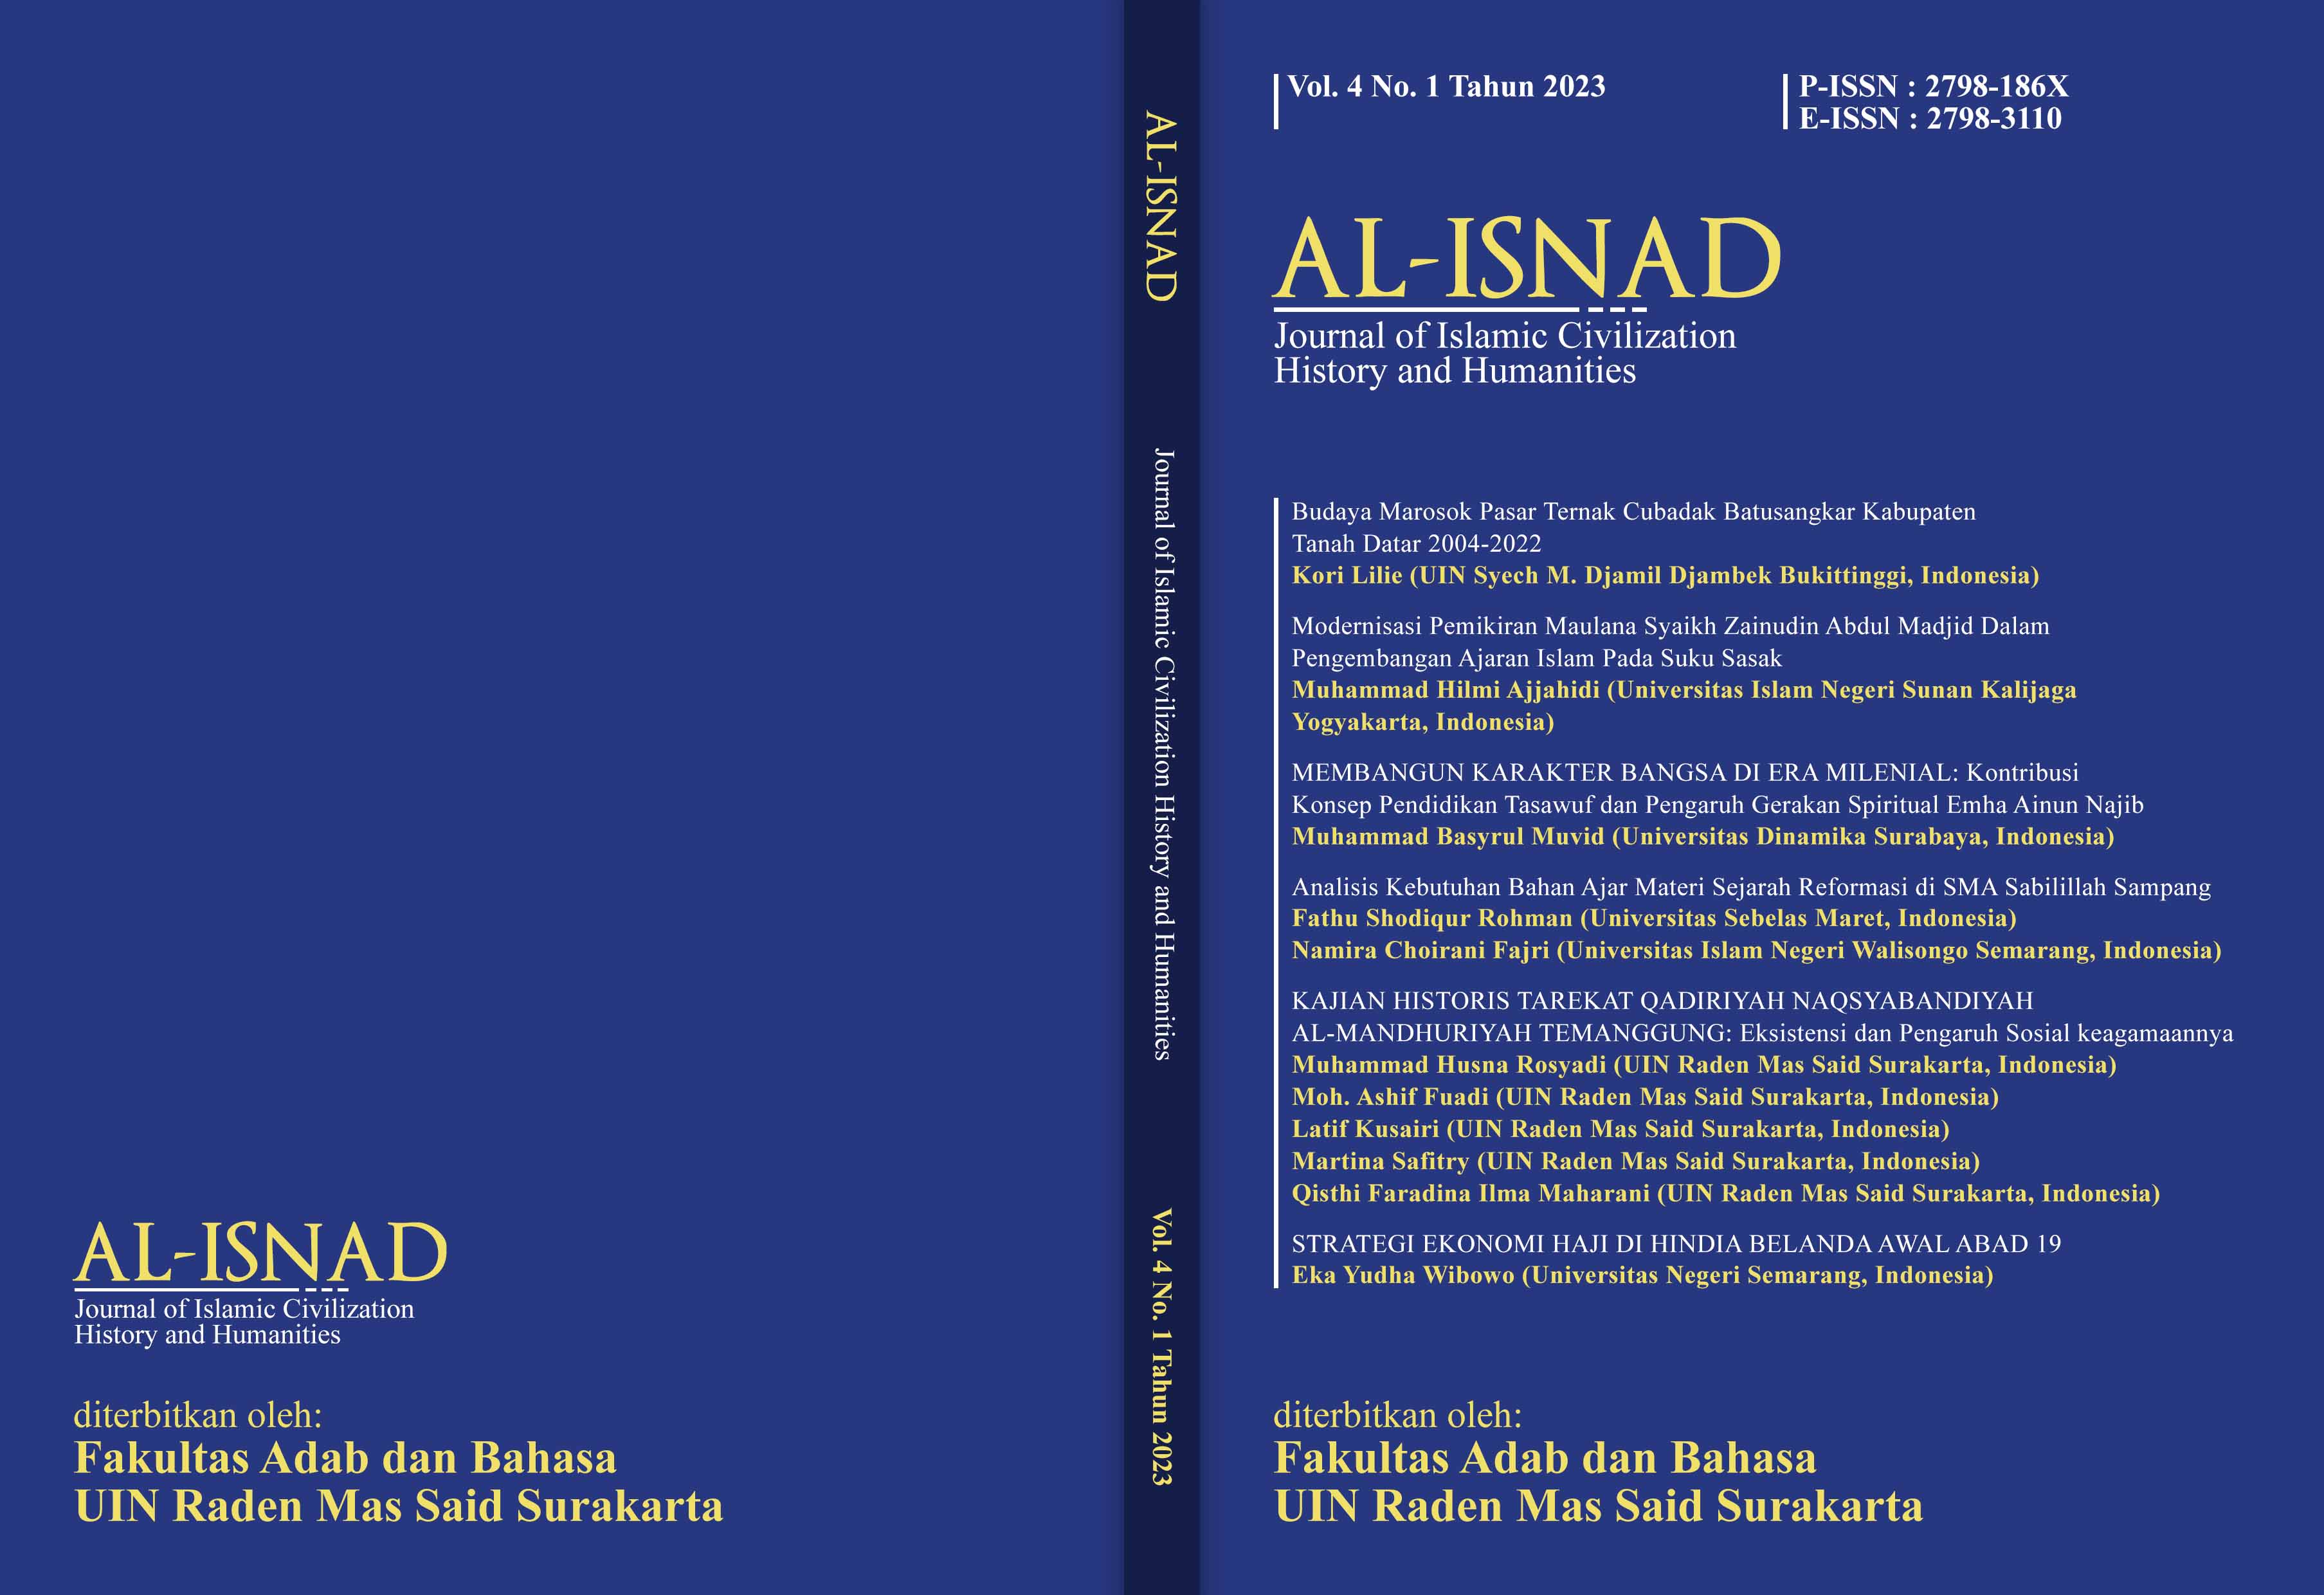 					View Vol. 4 No. 1 (2023): Al-Isnad: Journal of Islamic Civilization History and Humanities
				